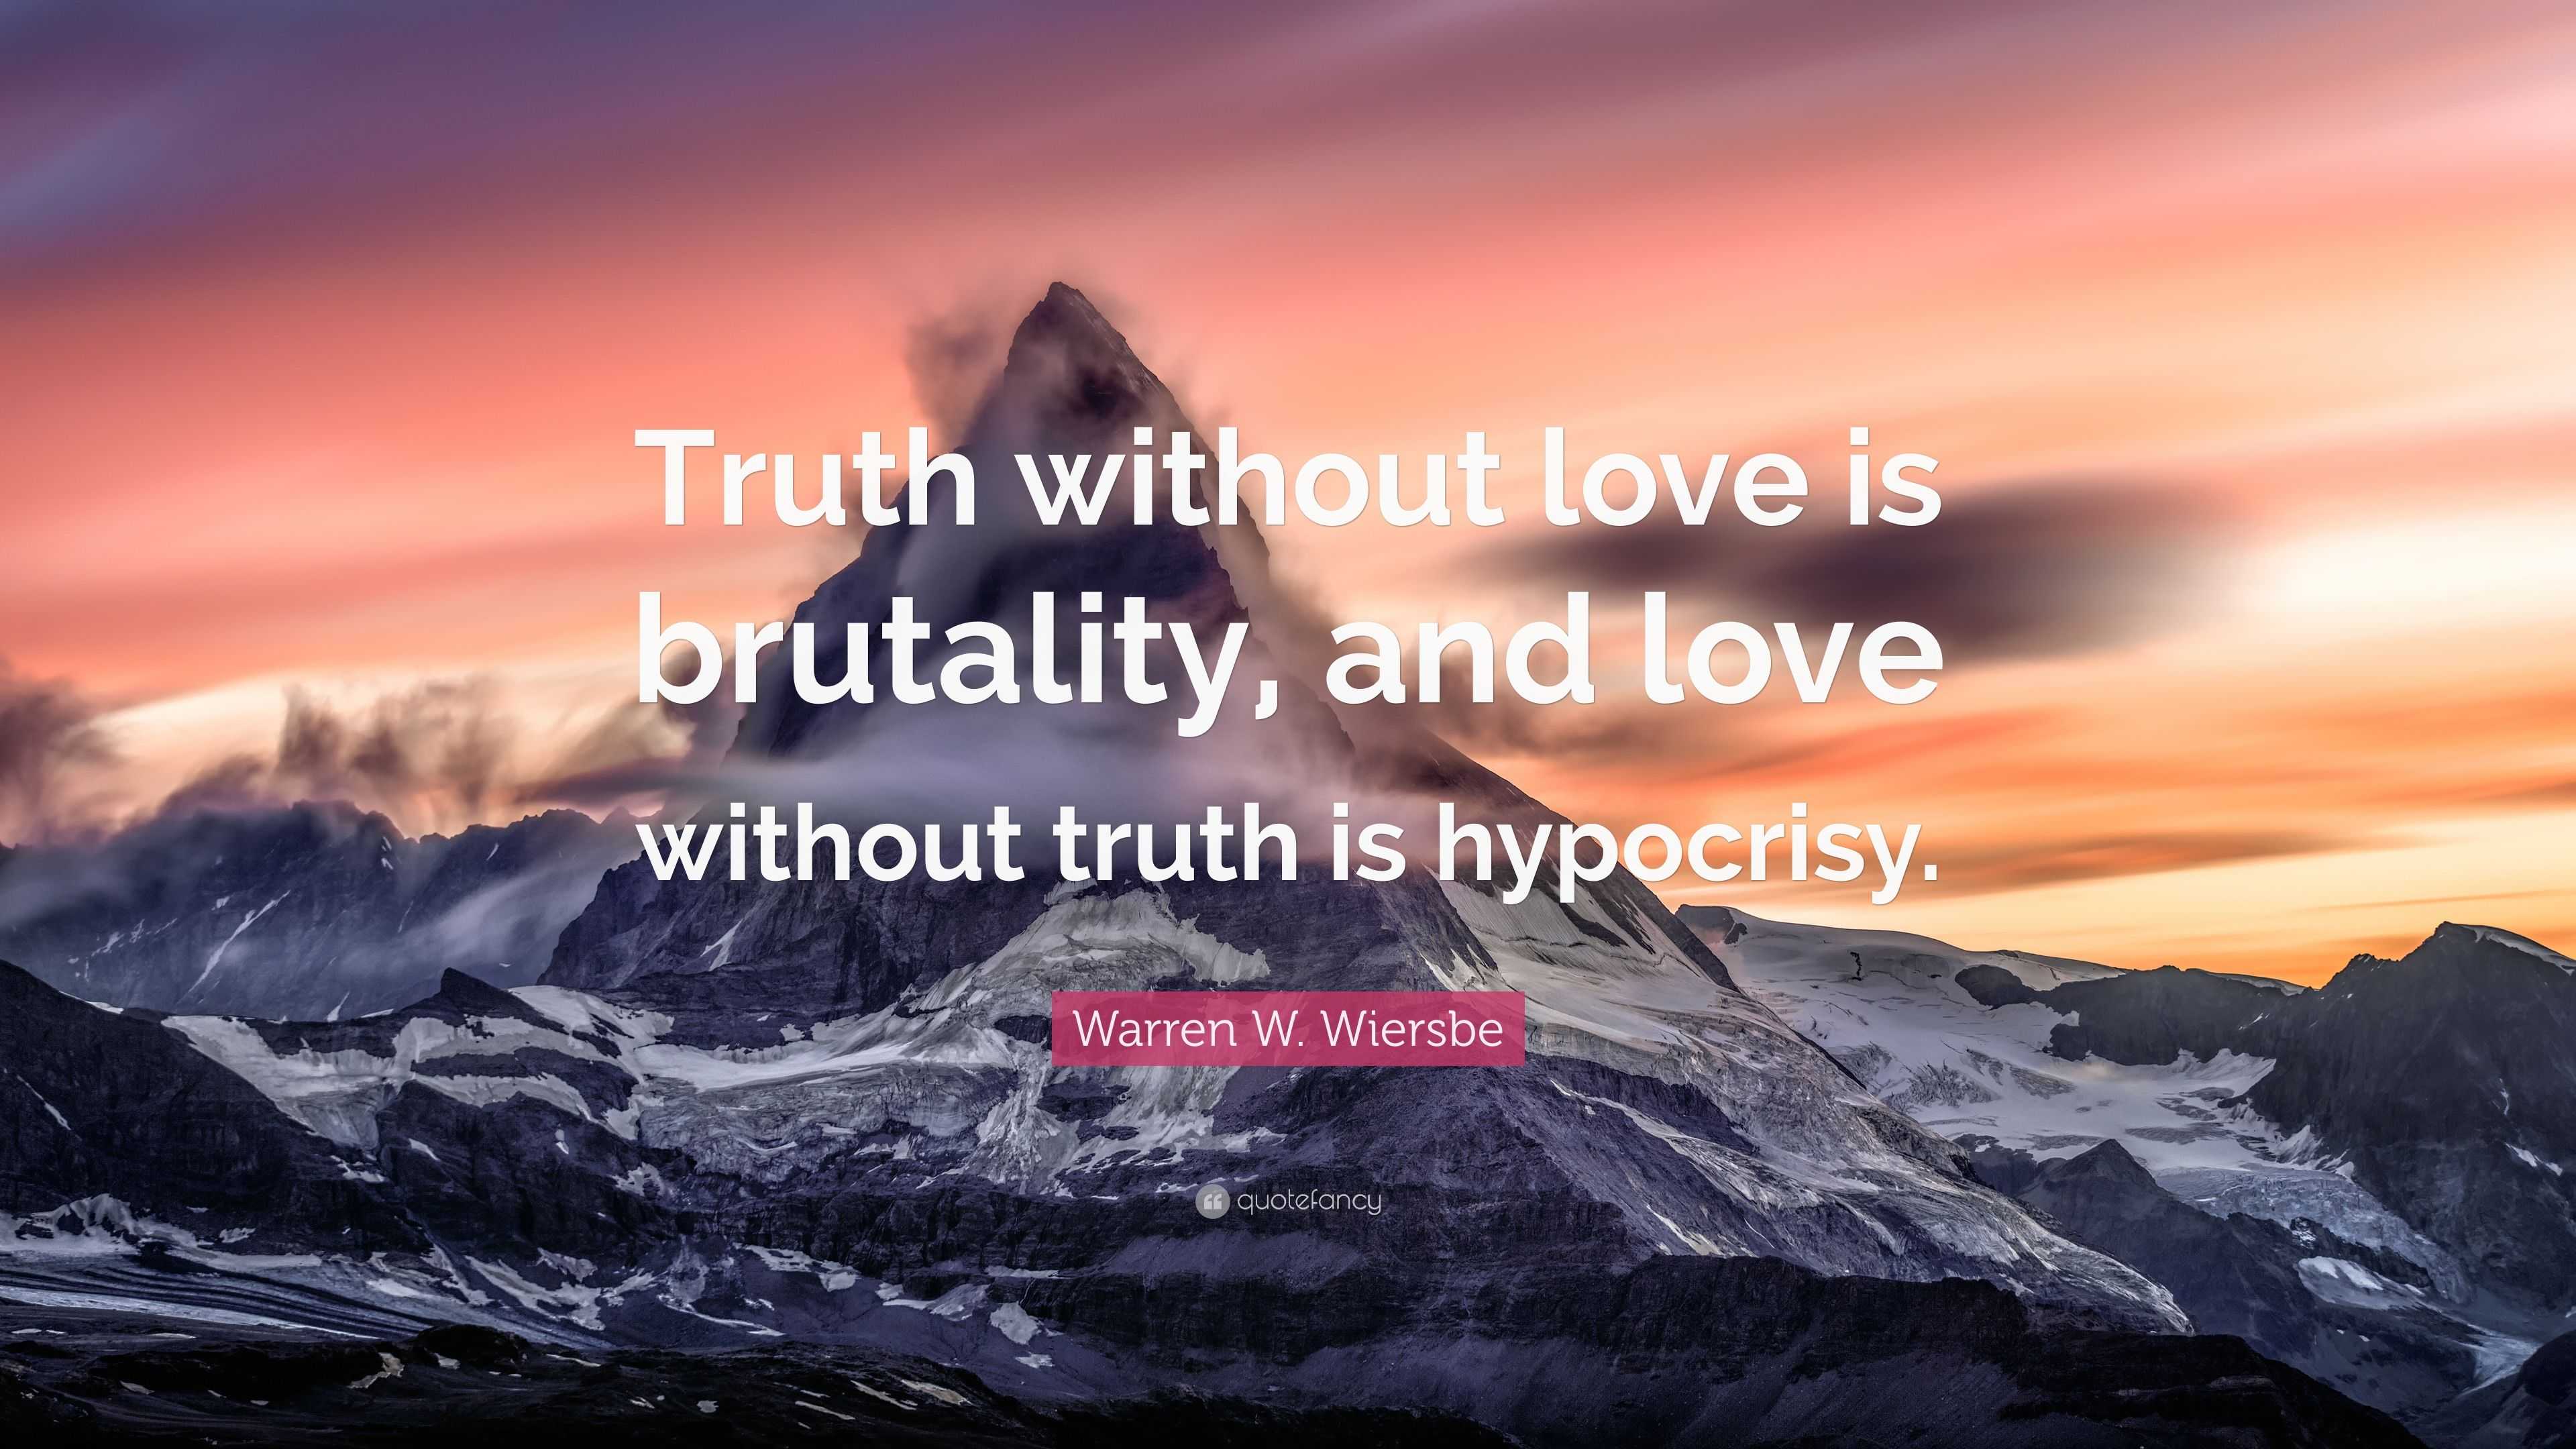 Warren W. Wiersbe Quote: “Truth without love is brutality, and love ...